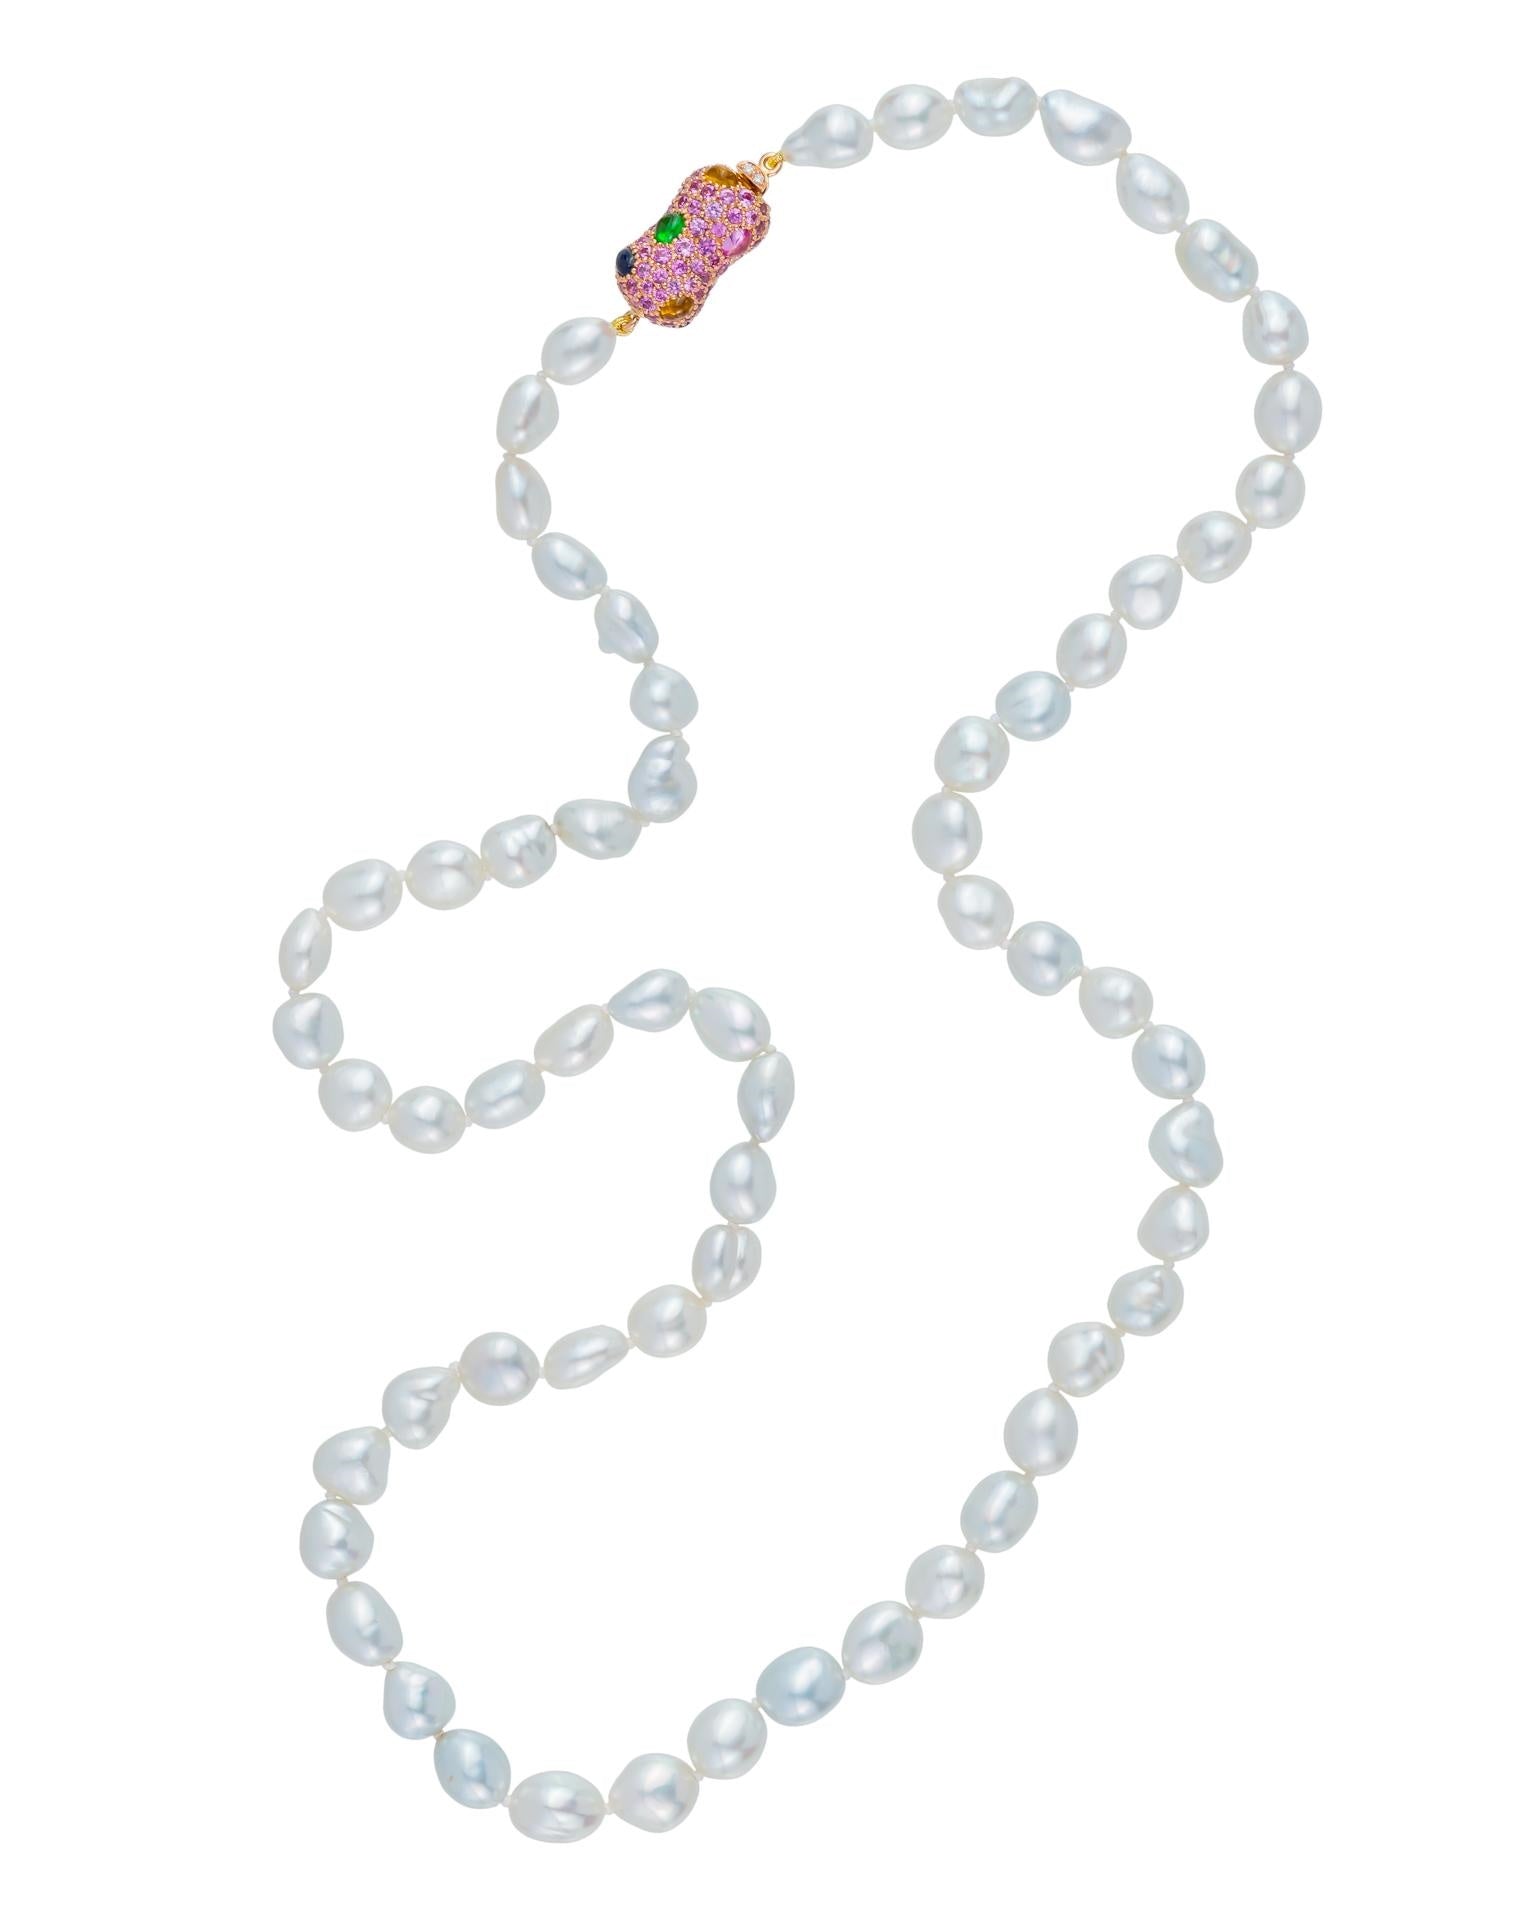 South Sea Keshi pearl necklace featuring a clasp set with a myriad of gemstones, craftedin 18 karat rose gold.